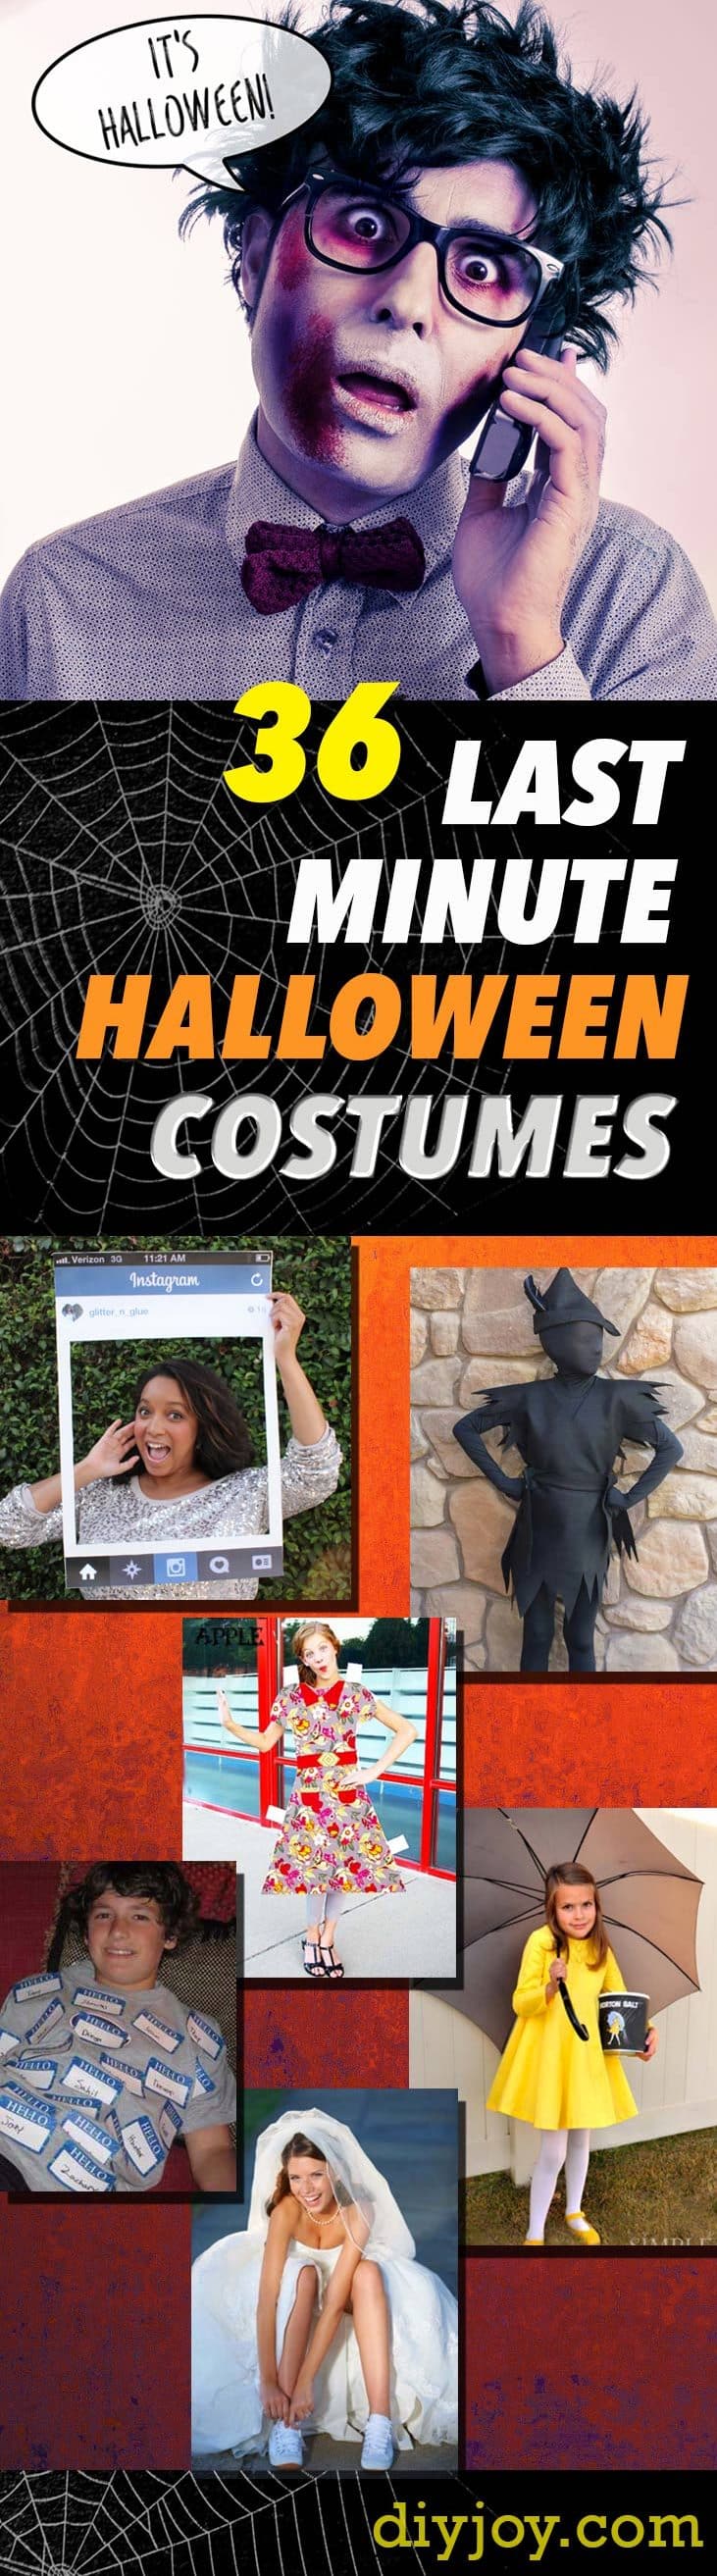 Last Minute Halloween Costumes -Quick Ideas for Couples, Kids, Babies, Men and Women